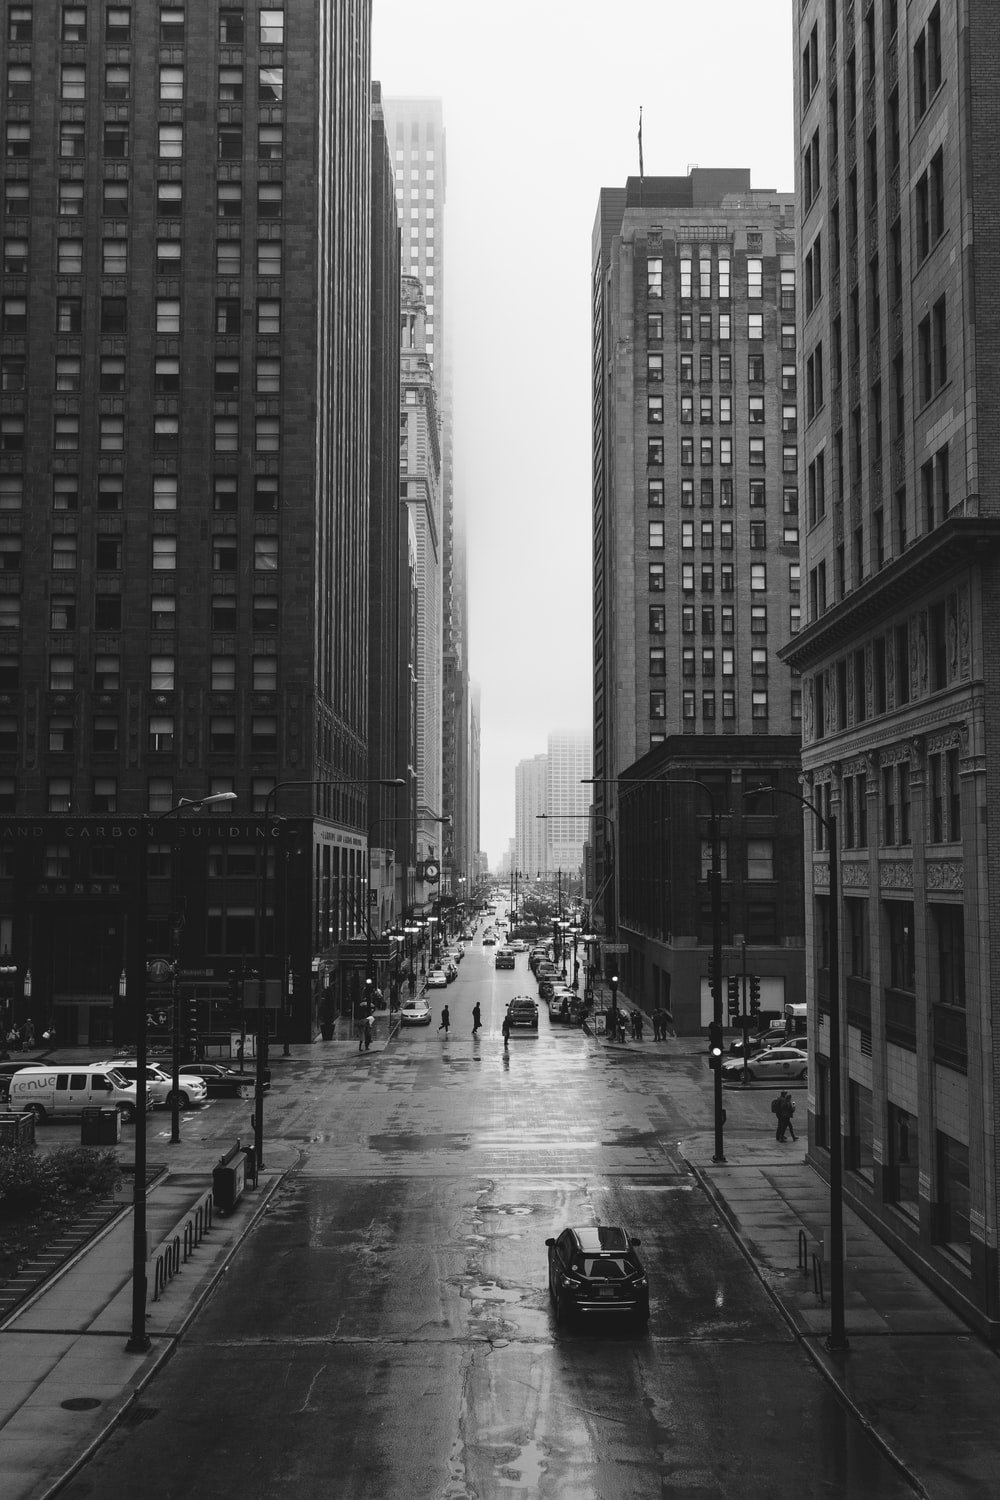 Black And White City Picture. Download Free Image